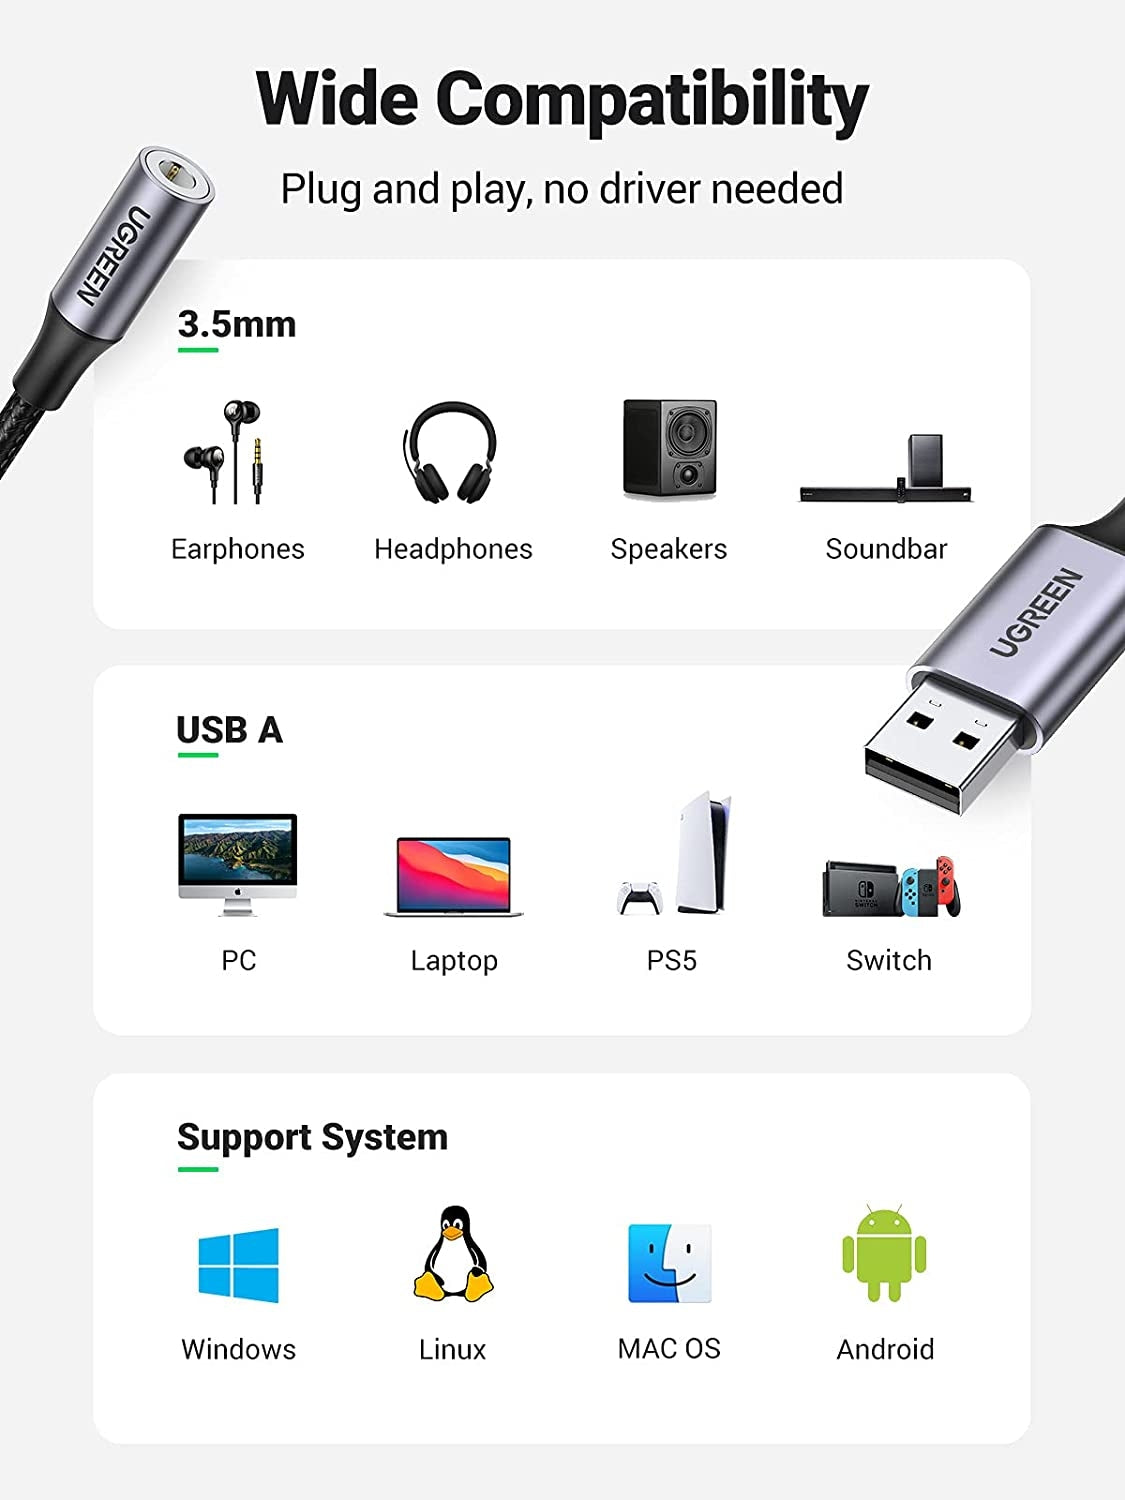 UGREEN 30757 USB to 3.5mm Audio Jack Sound Card Adapter